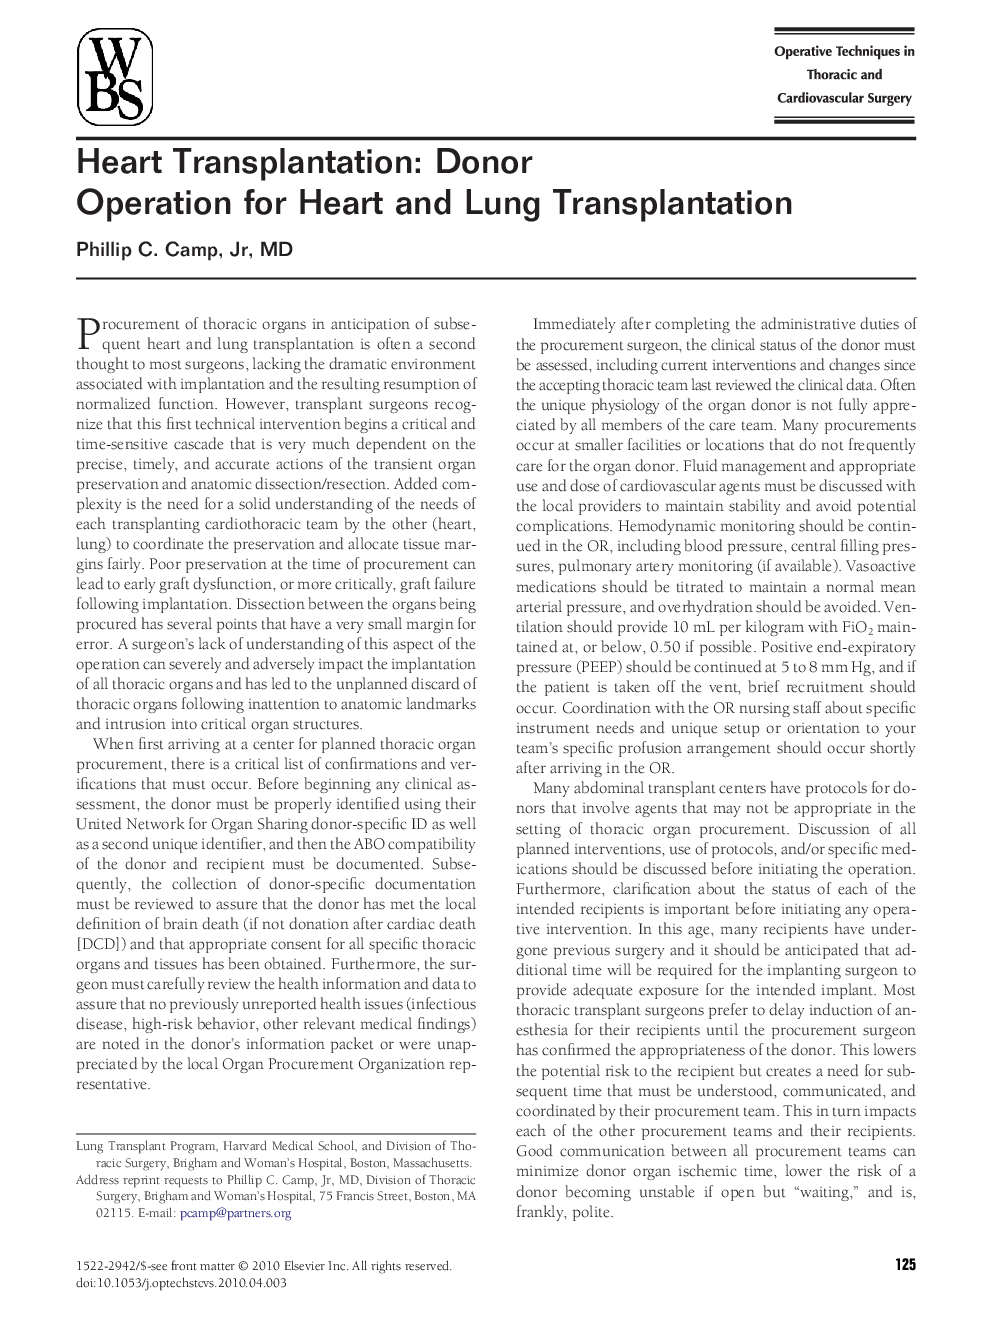 Heart Transplantation: Donor Operation for Heart and Lung Transplantation